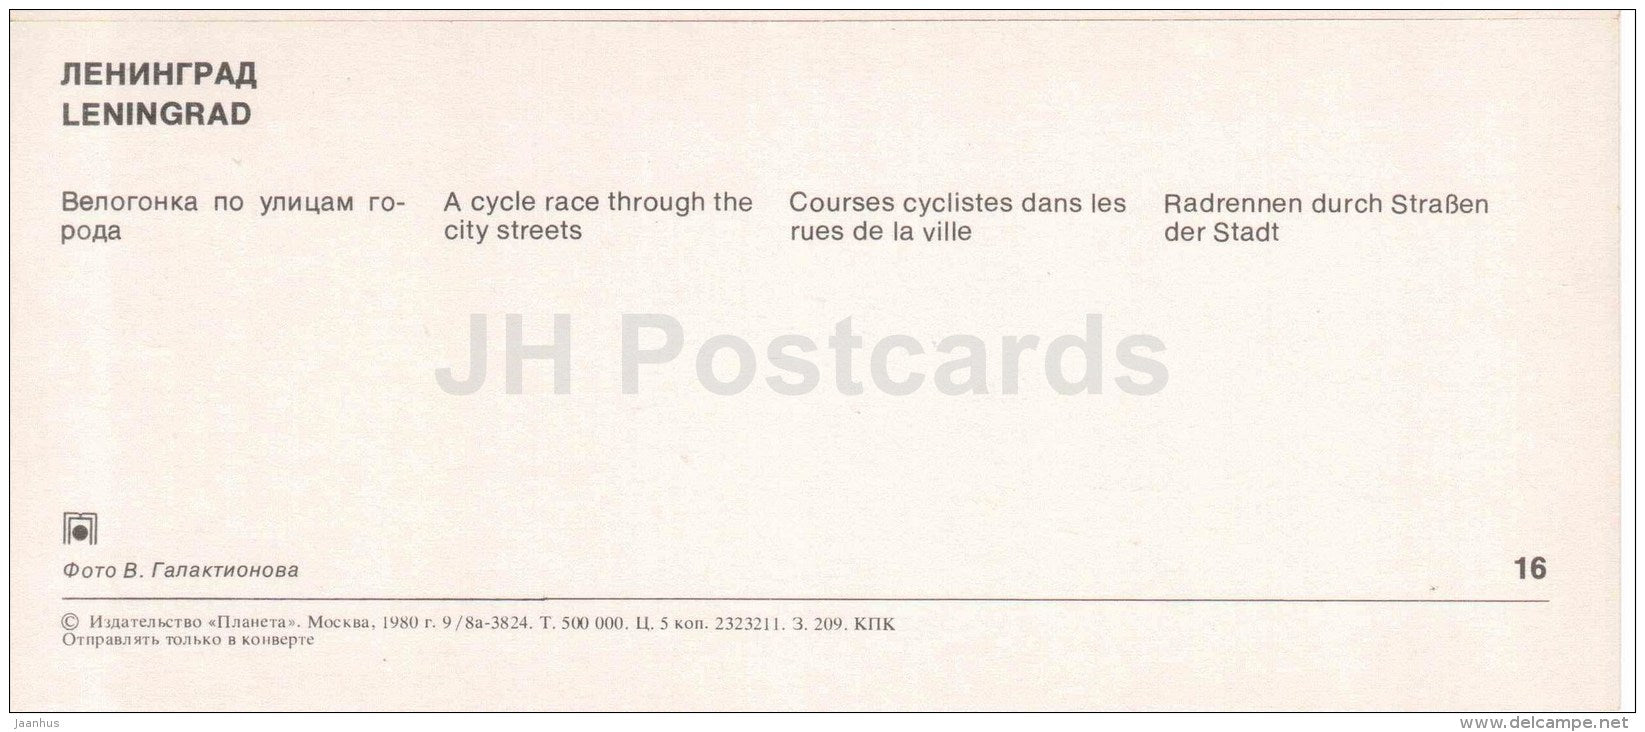 a cycle race through the city streets - bicycle - cycling - Leningrad - St. Petersburg - 1980 - Russia USSR - unused - JH Postcards